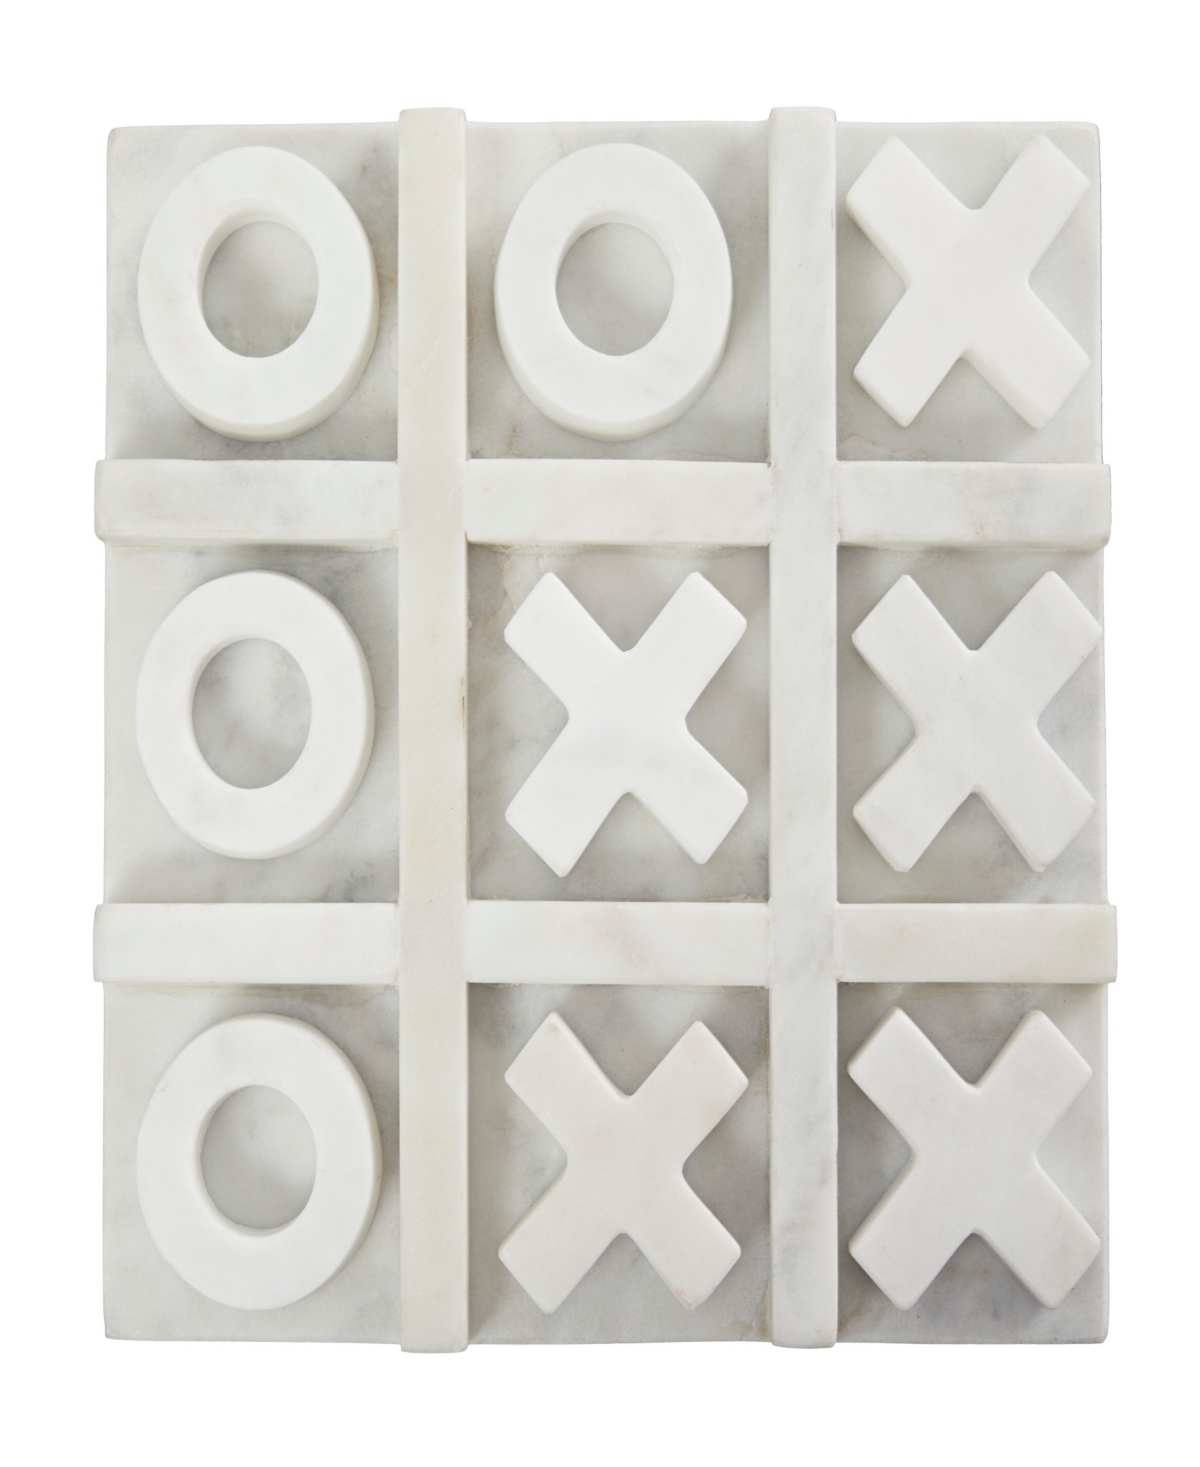 Rosemary Lane Real Marble Tic Tac Toe Game Set, 9" X 9" X 1" In White